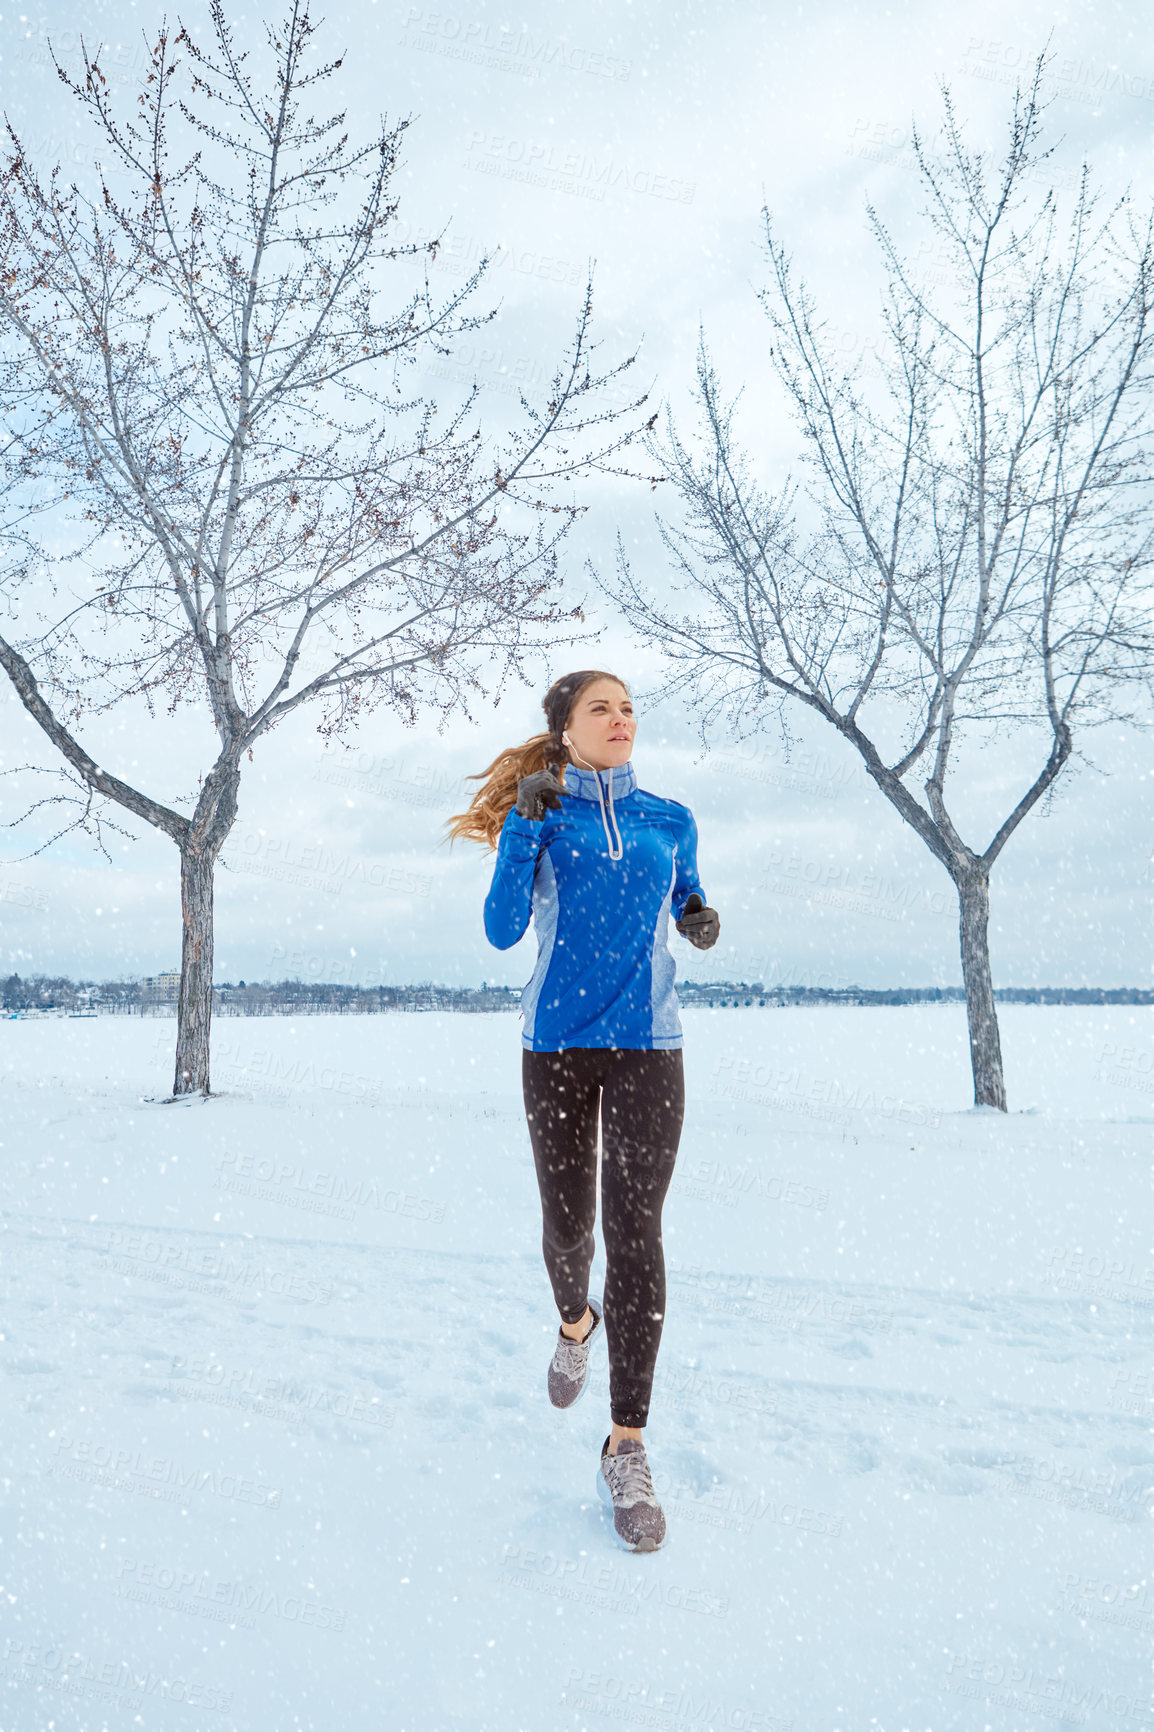 Buy stock photo Shot of a woman wearing warm clothing while out for a run through the snow